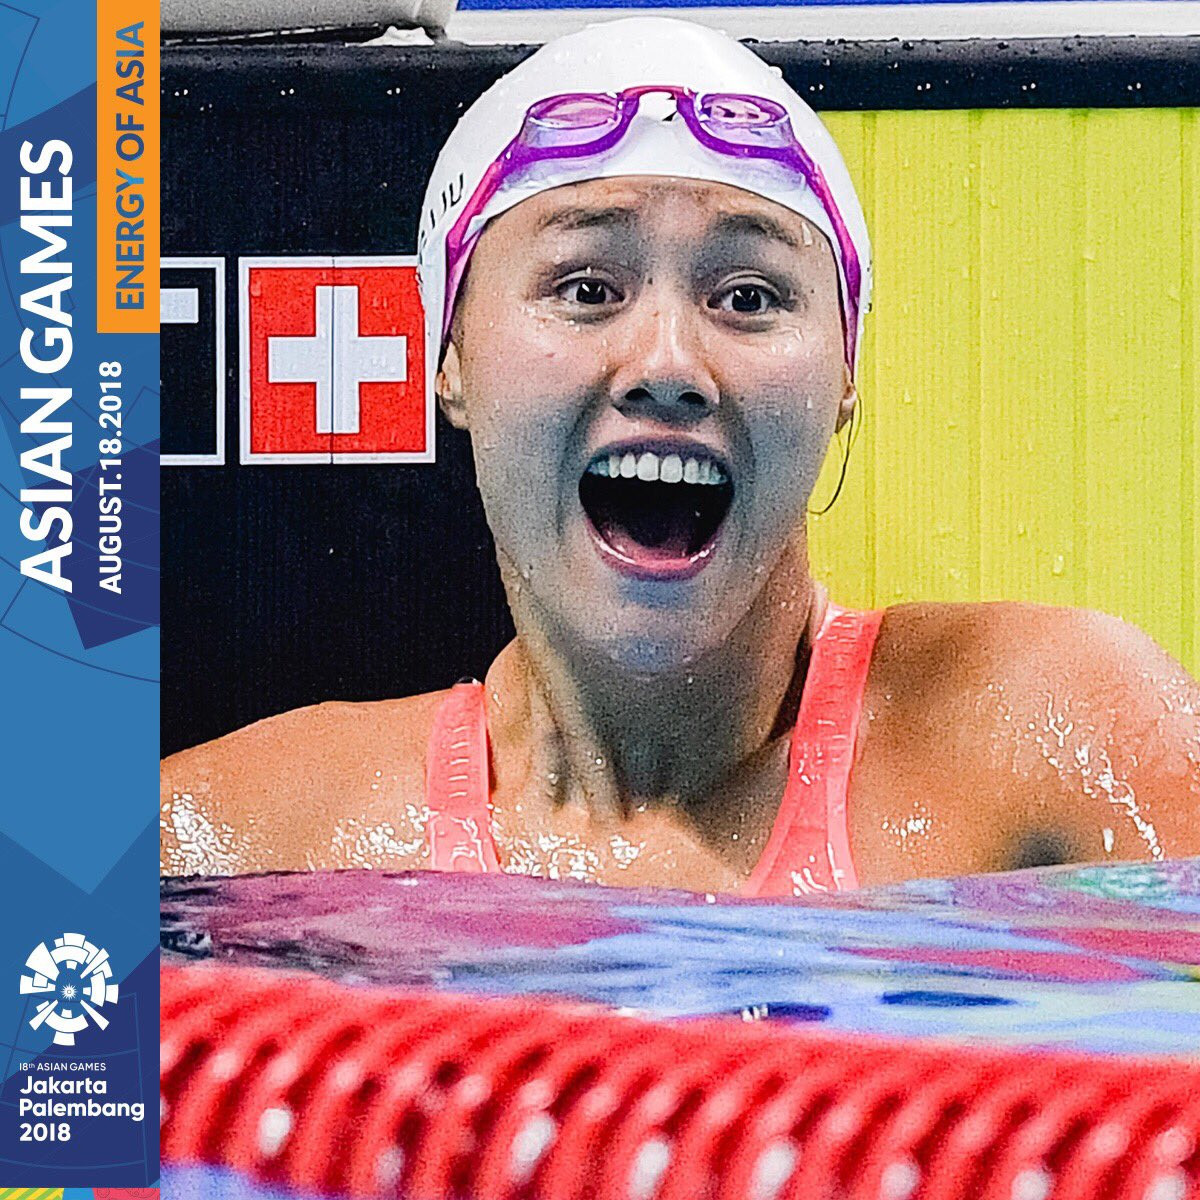 Xiang Liu reacted with shock and amazement when she won the women's 50m butterfly final in a world record time ©Jakarta Palembang 2018